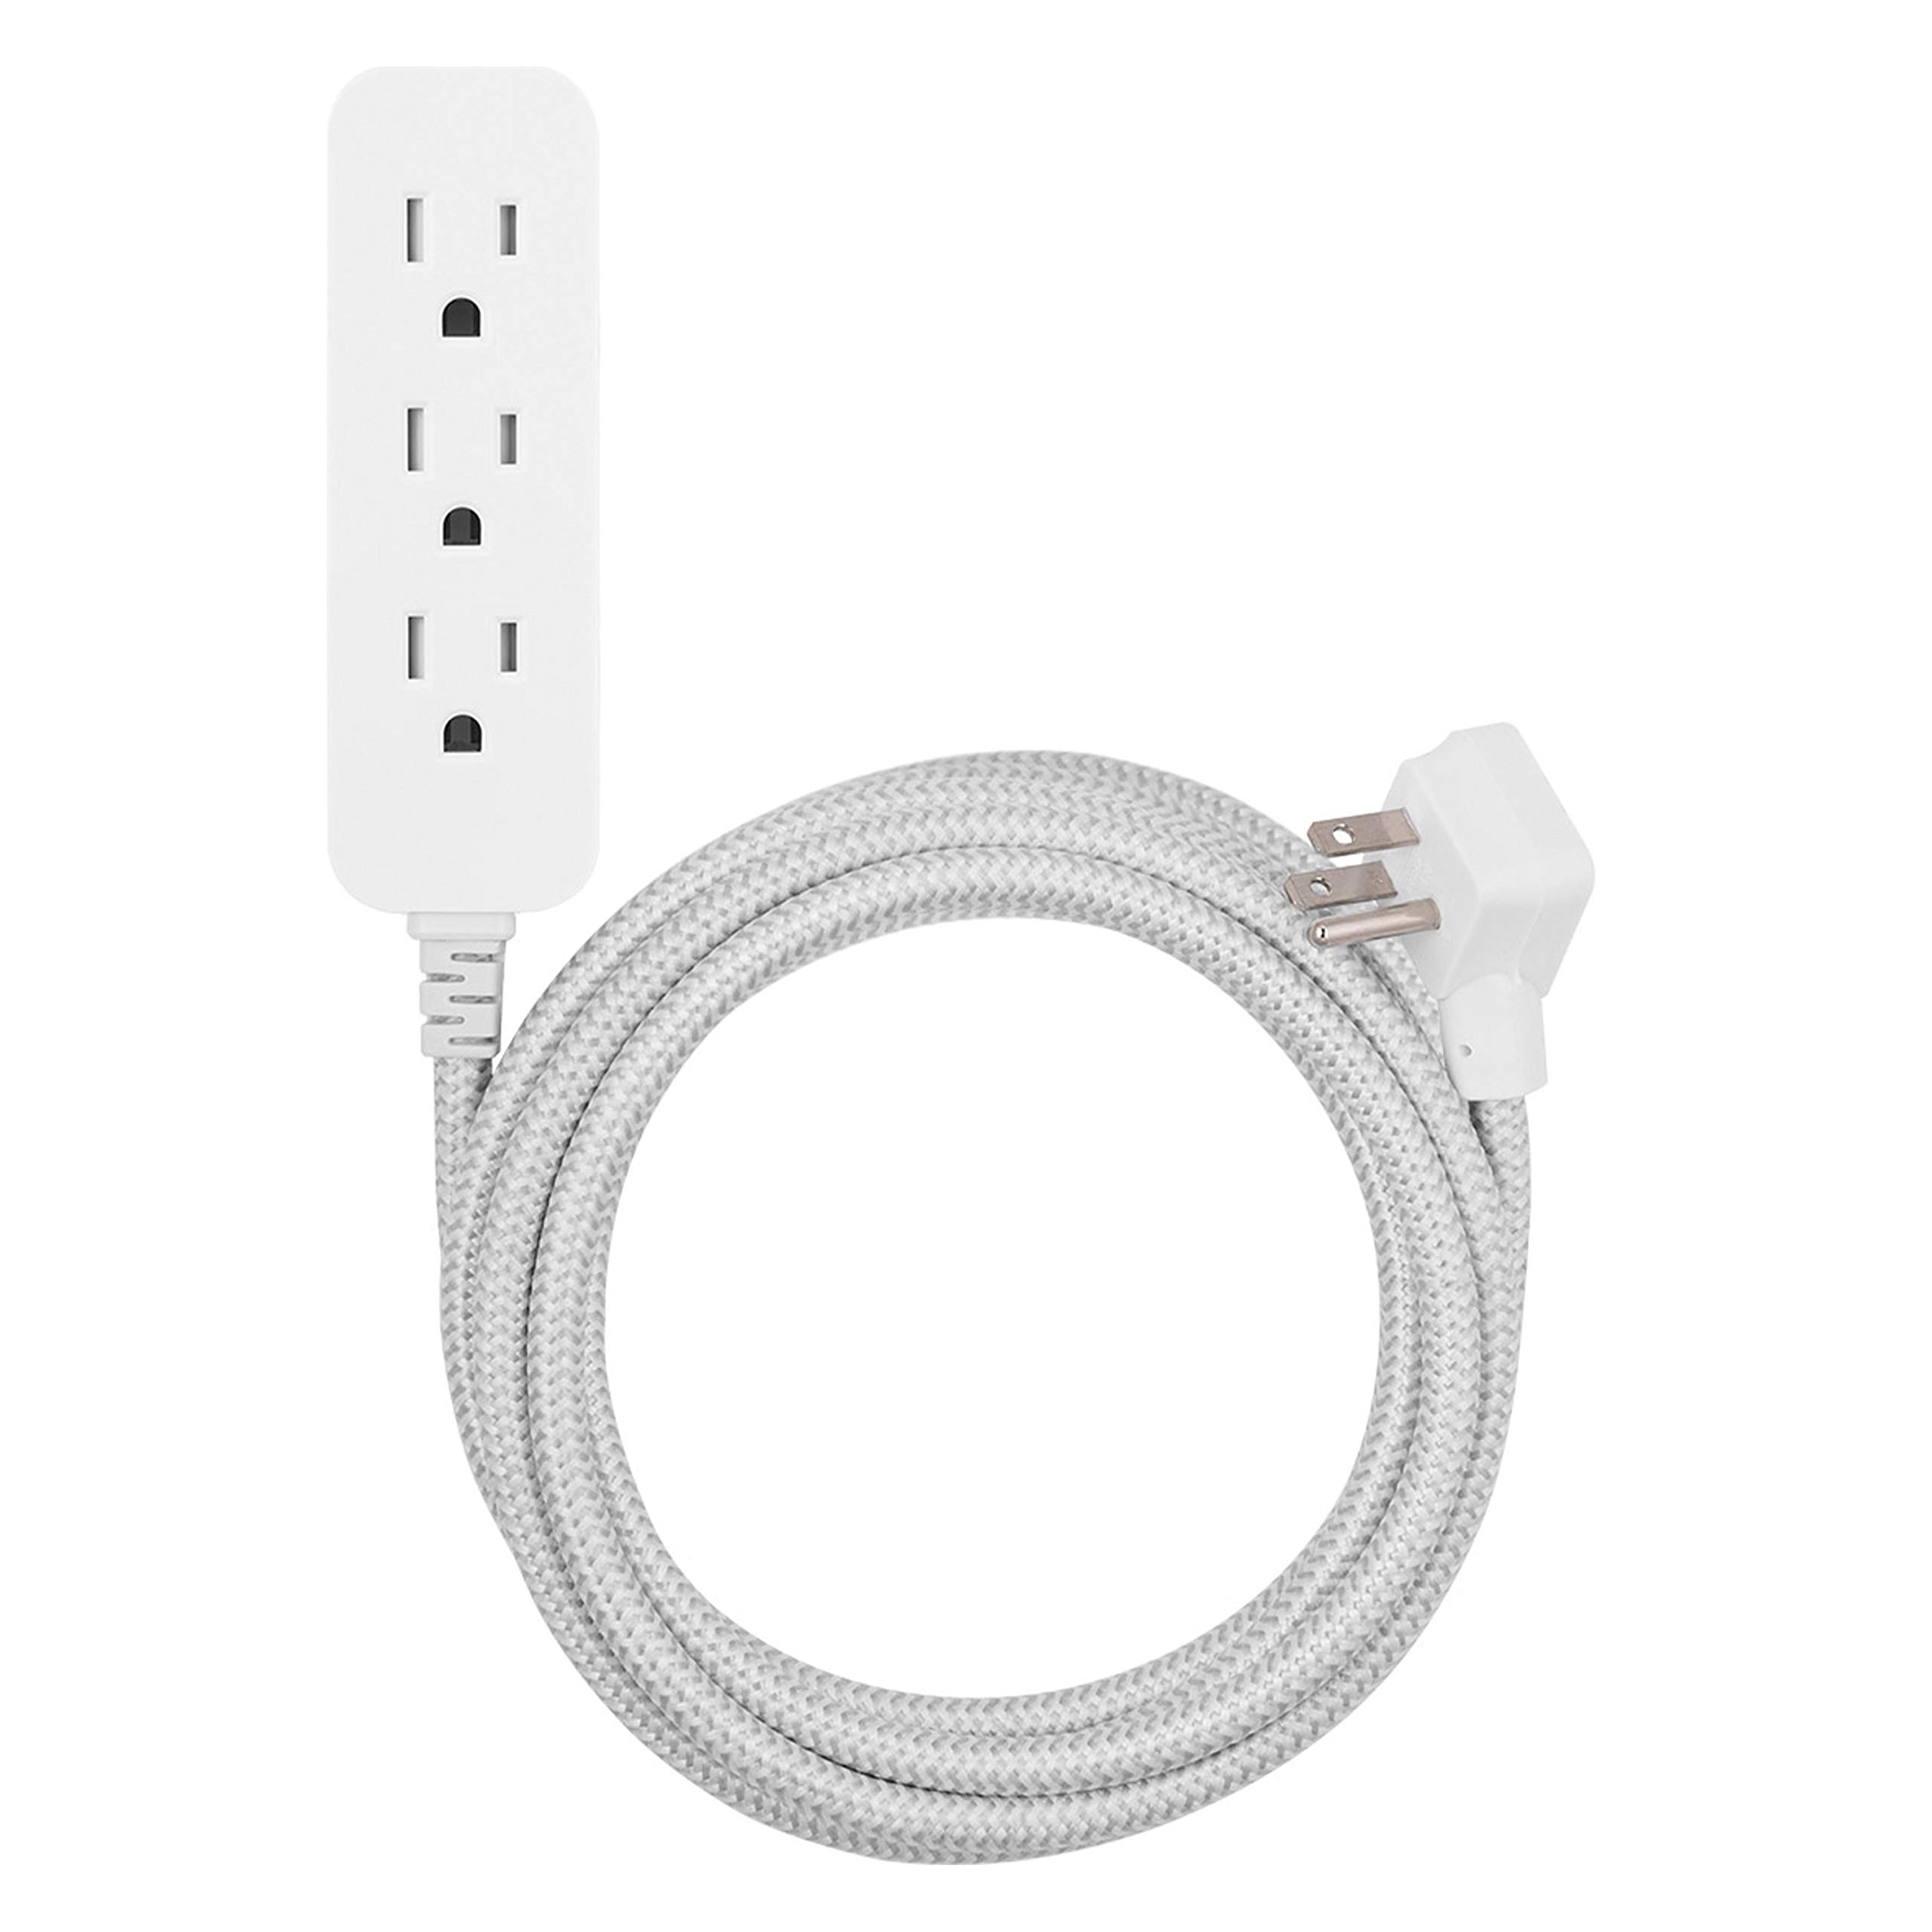 3 Outlet 15ft Extension Cord